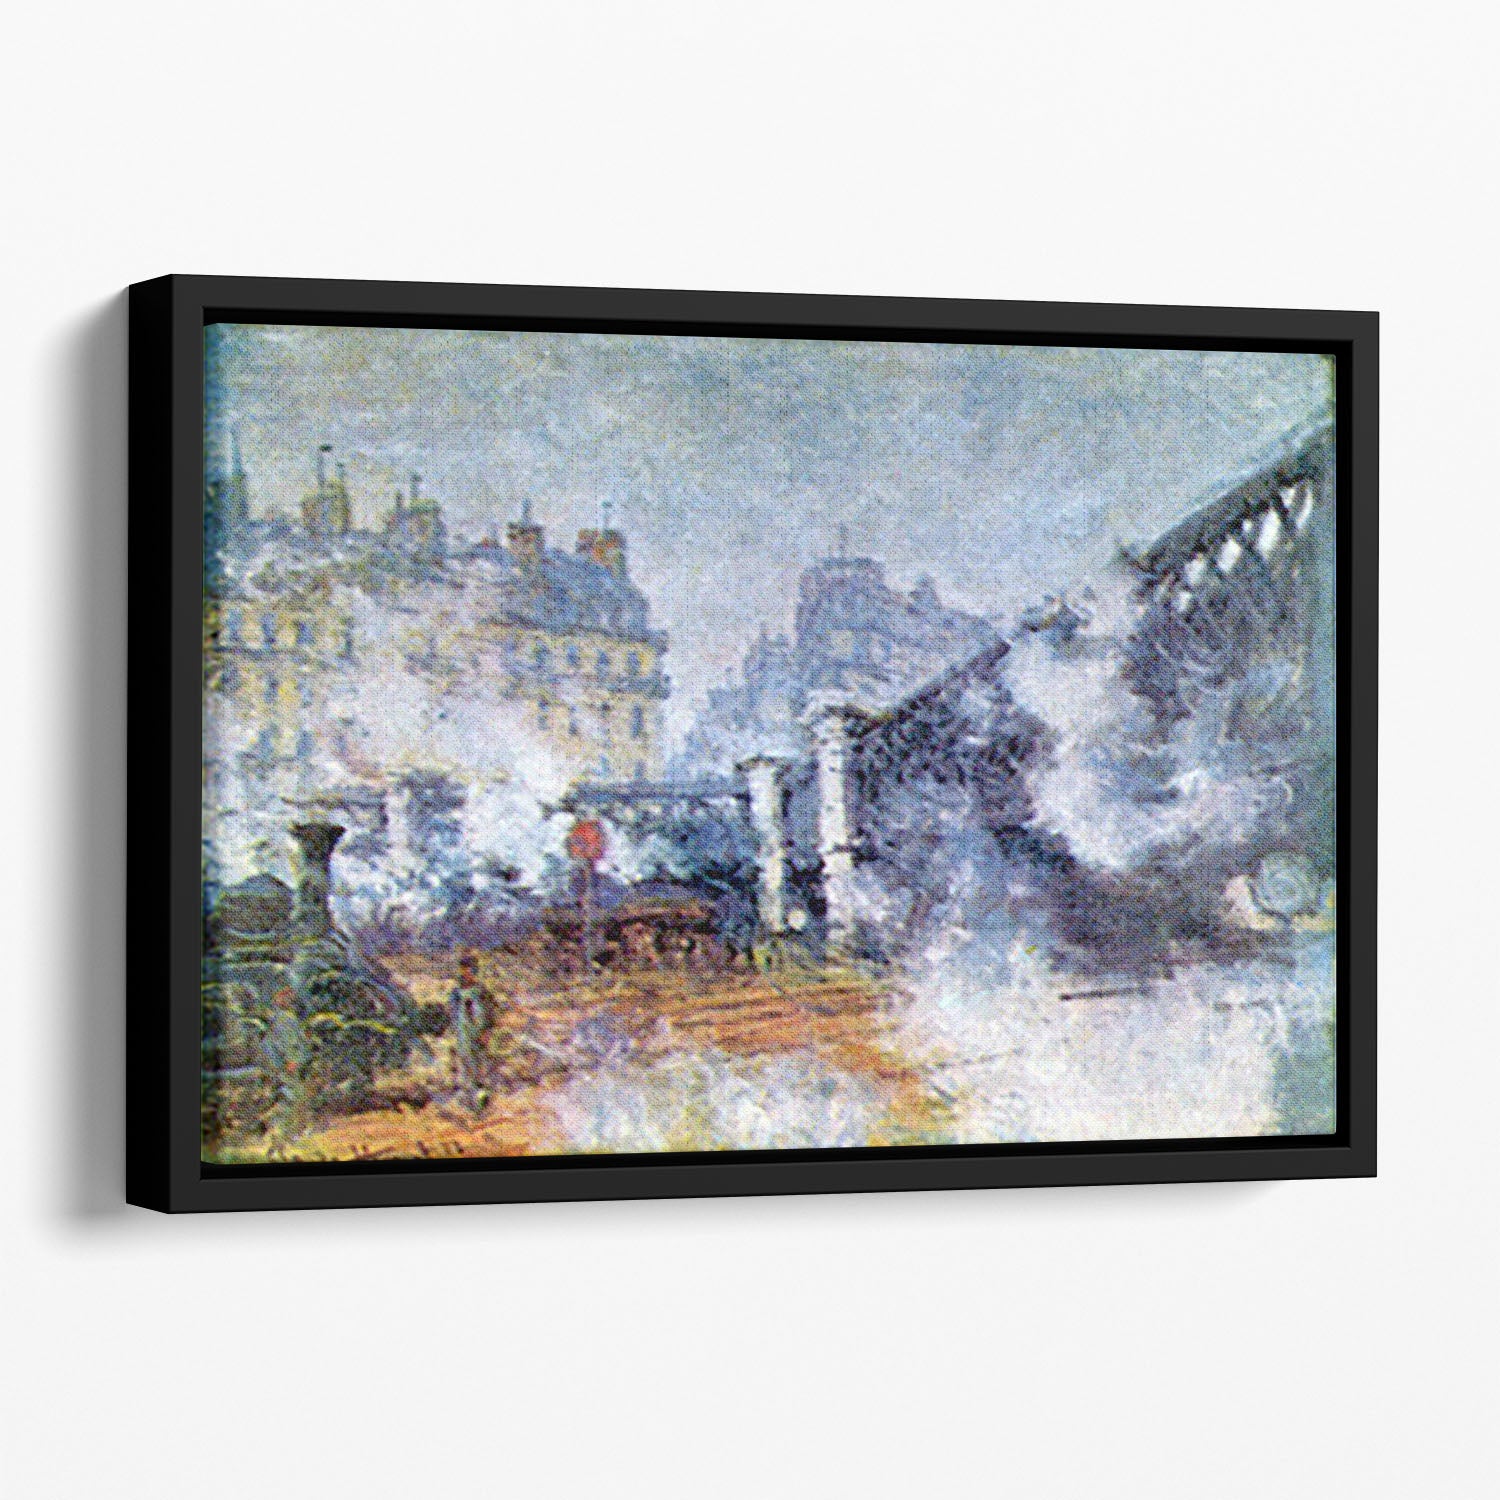 The Europe Bridge Saint Lazare station in Paris by Monet Floating Framed Canvas